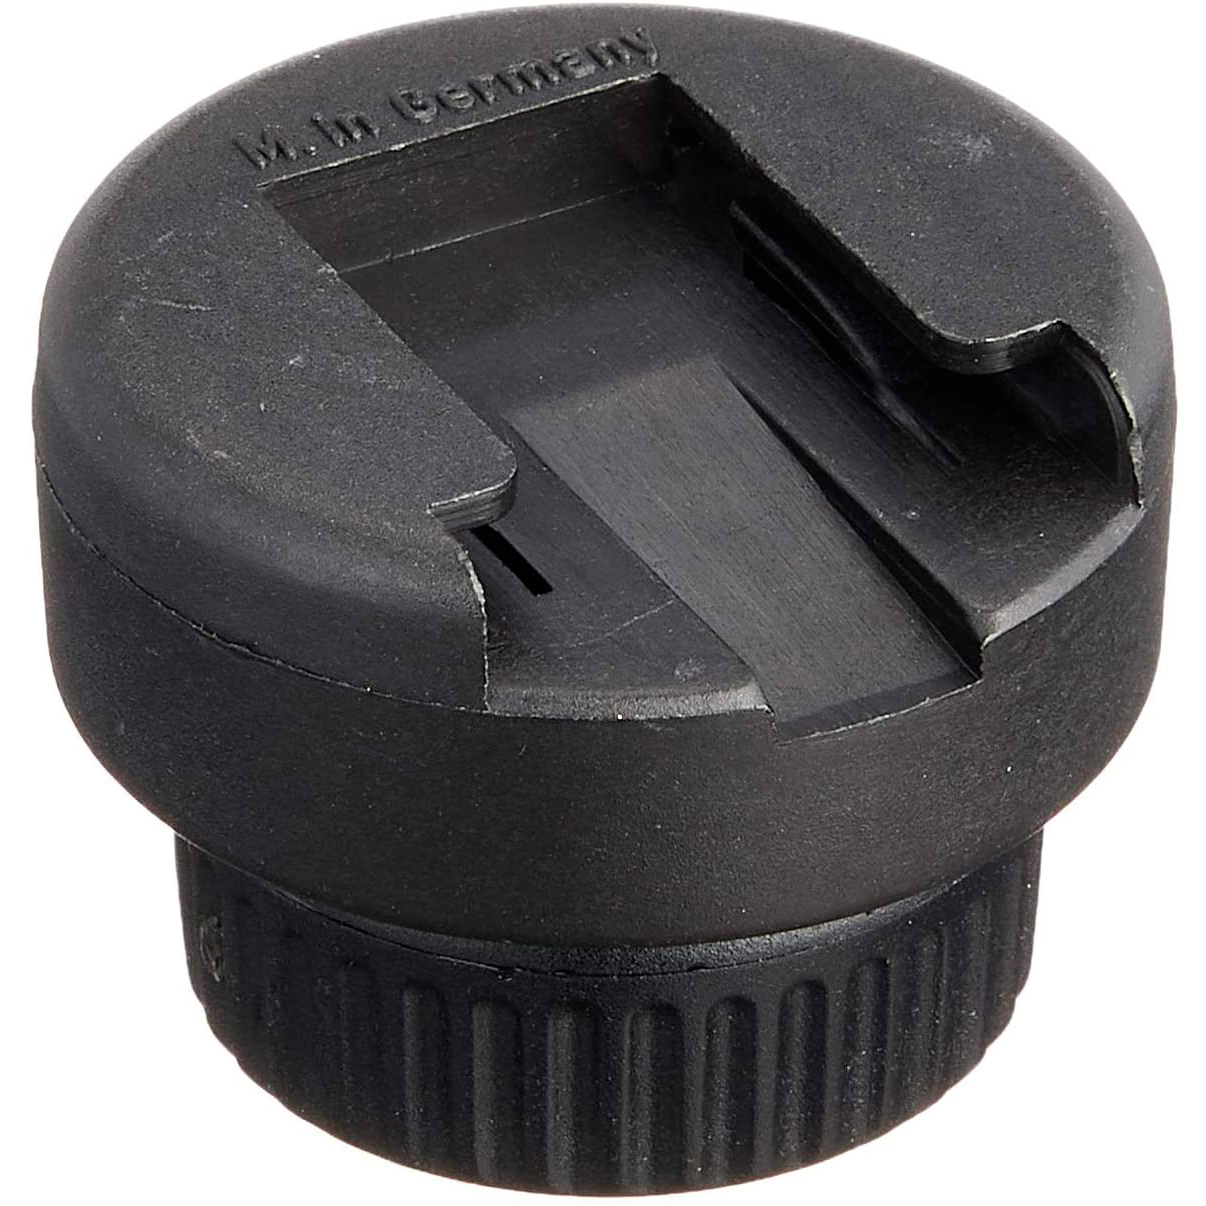 Manfrotto 143S Flash Shoe Adapter